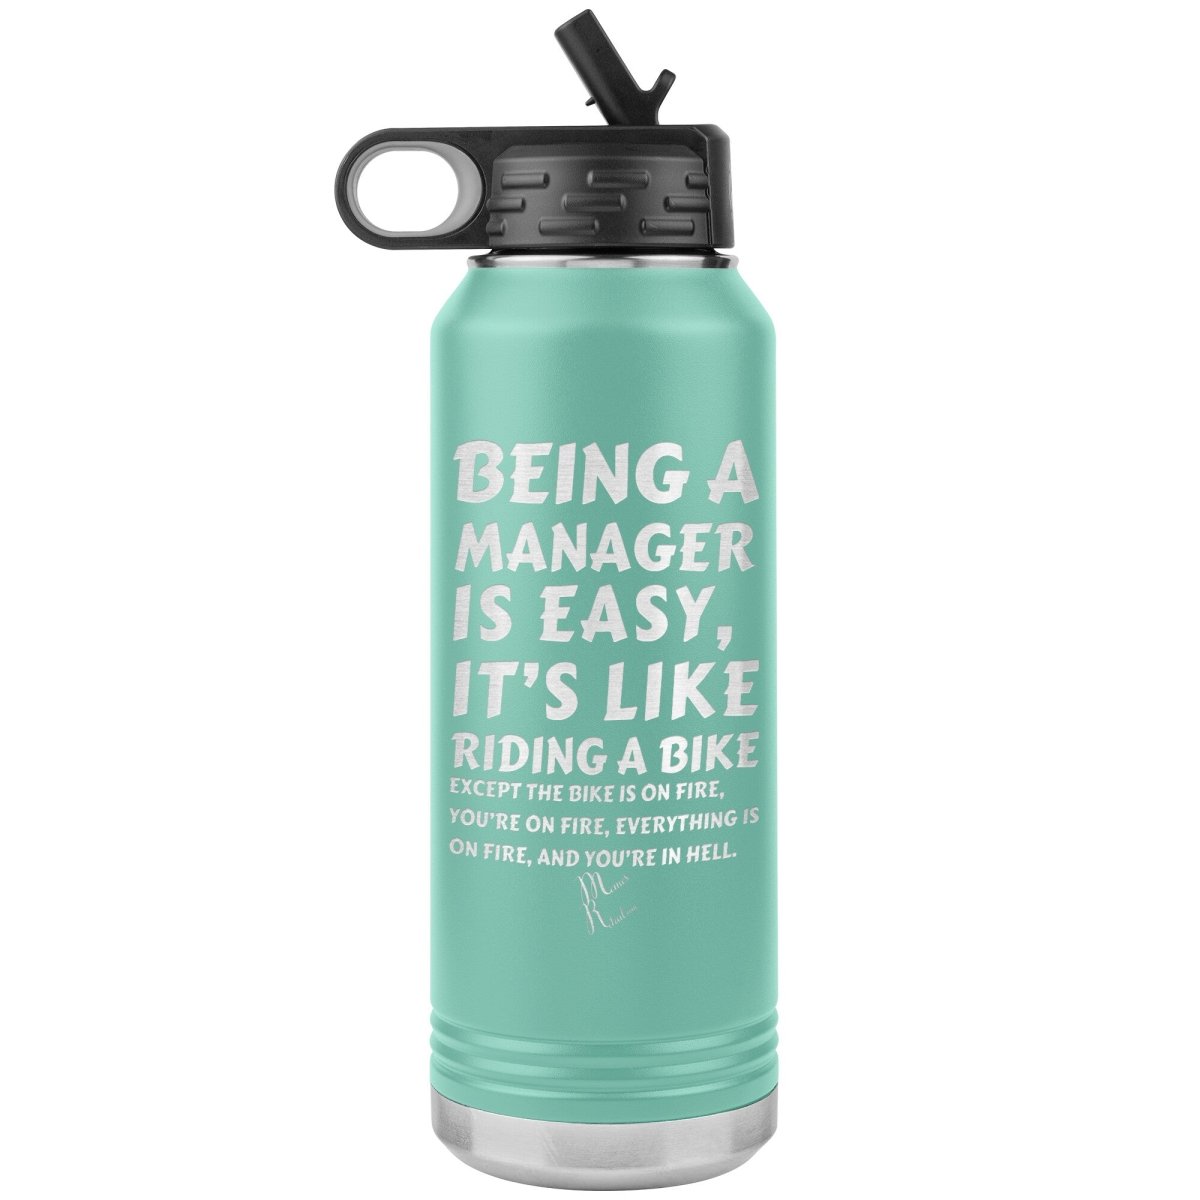 Being a manager is easy….32oz Water Tumbler, Teal - MemesRetail.com